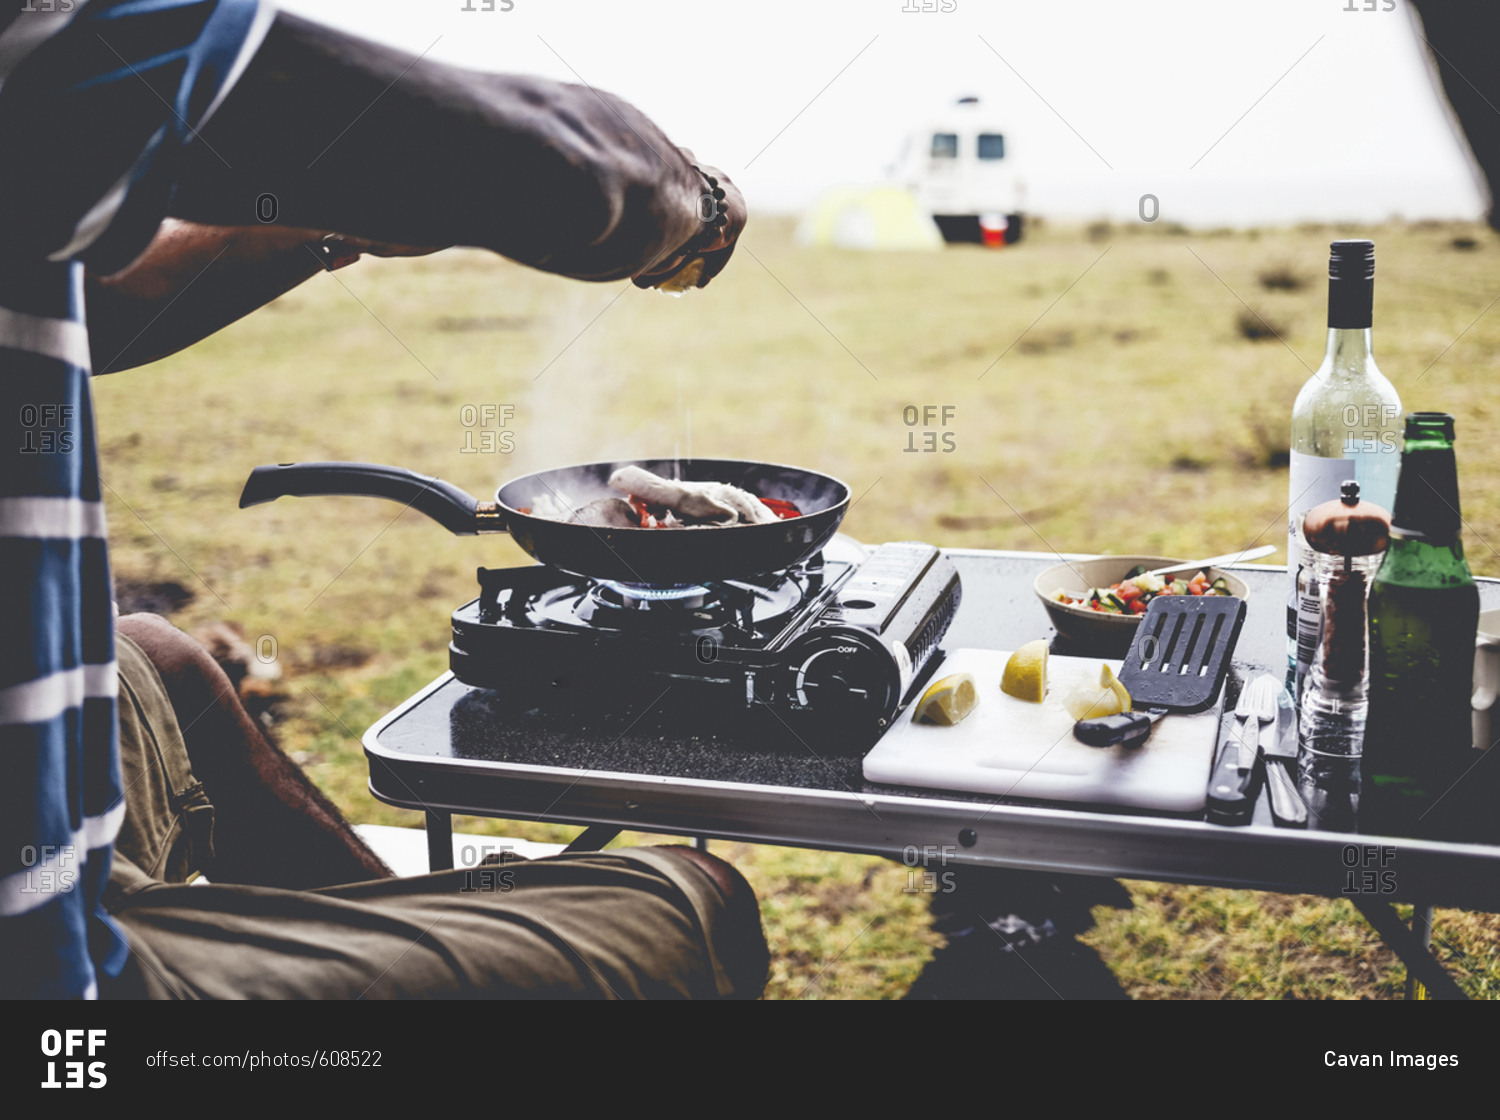 Cropped image of man preparing food on camping stove at campsite